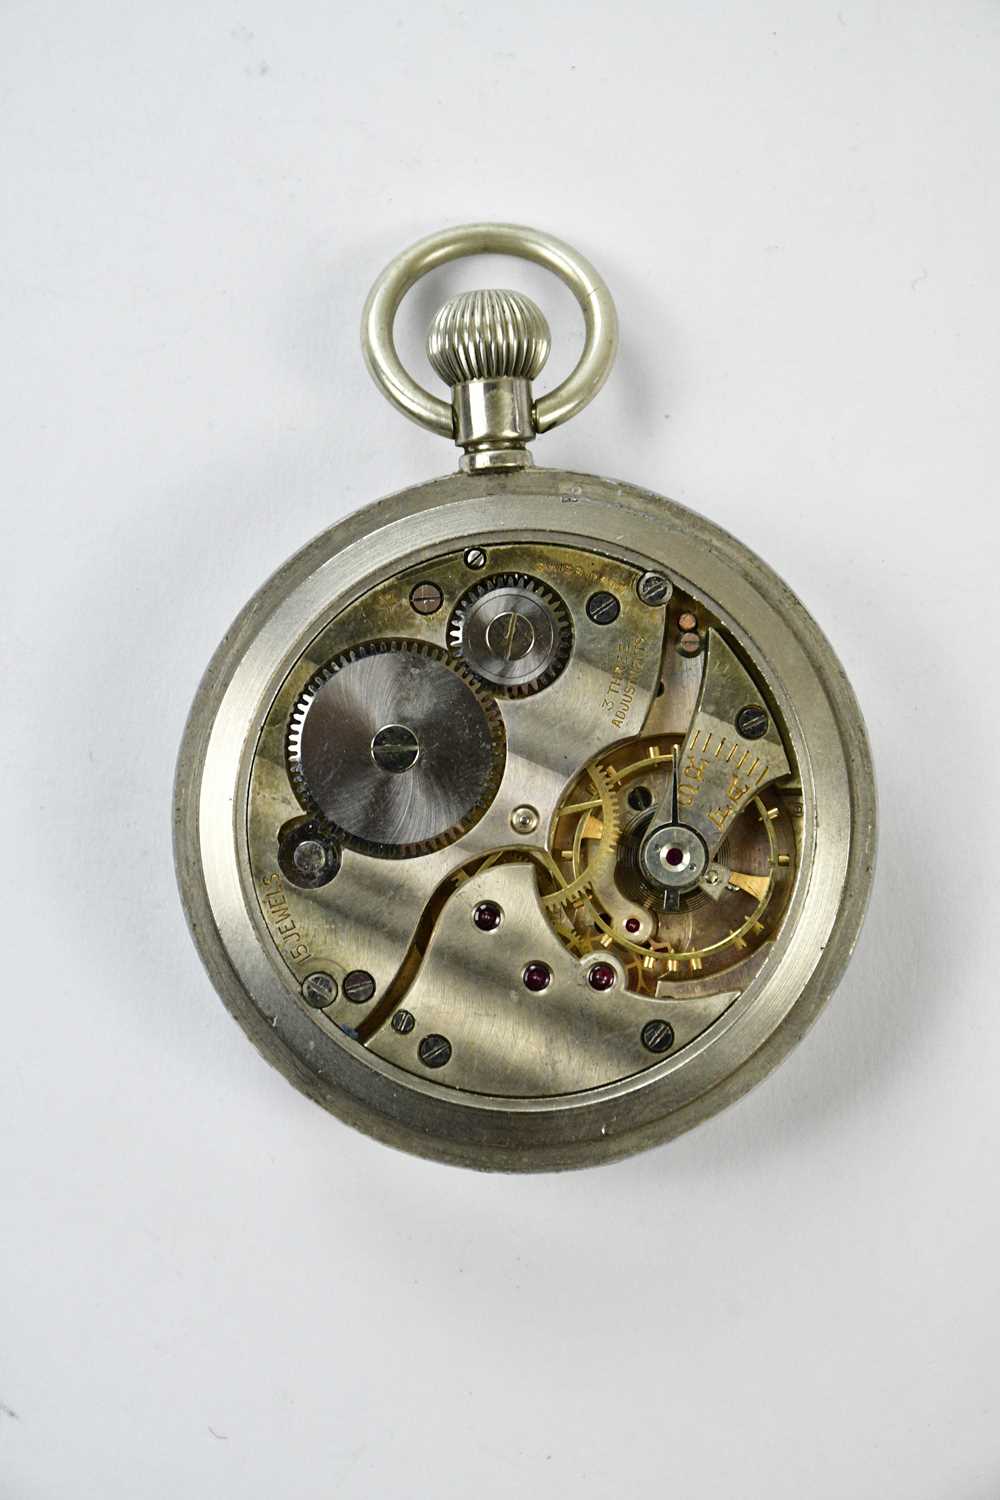 ELGIN; a military issue plated pocket watch, with military arrow and numbered 22733, diameter 5cm, - Image 4 of 4